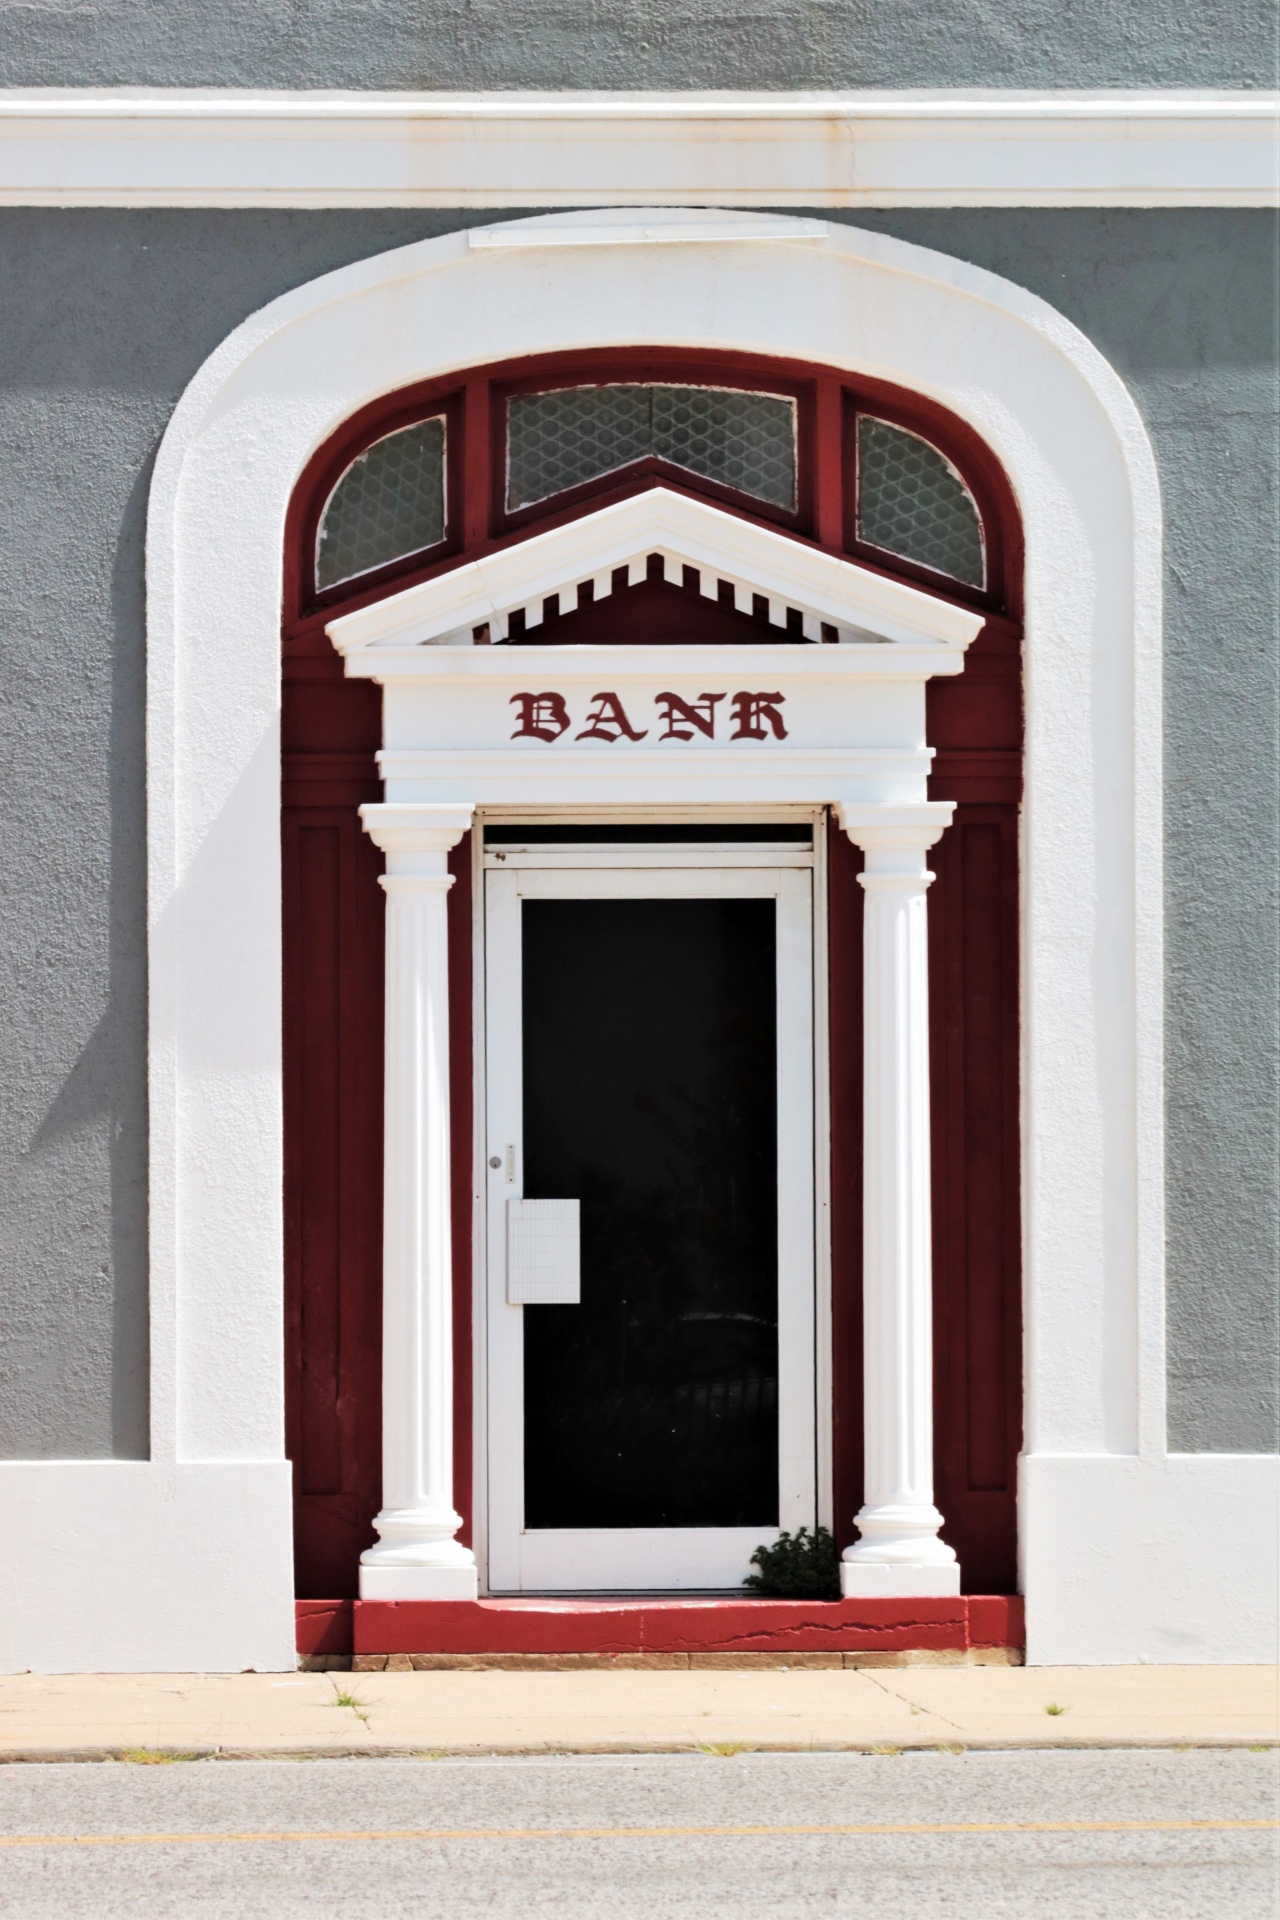 The door of a small town bank, with white arched doorway and columns.